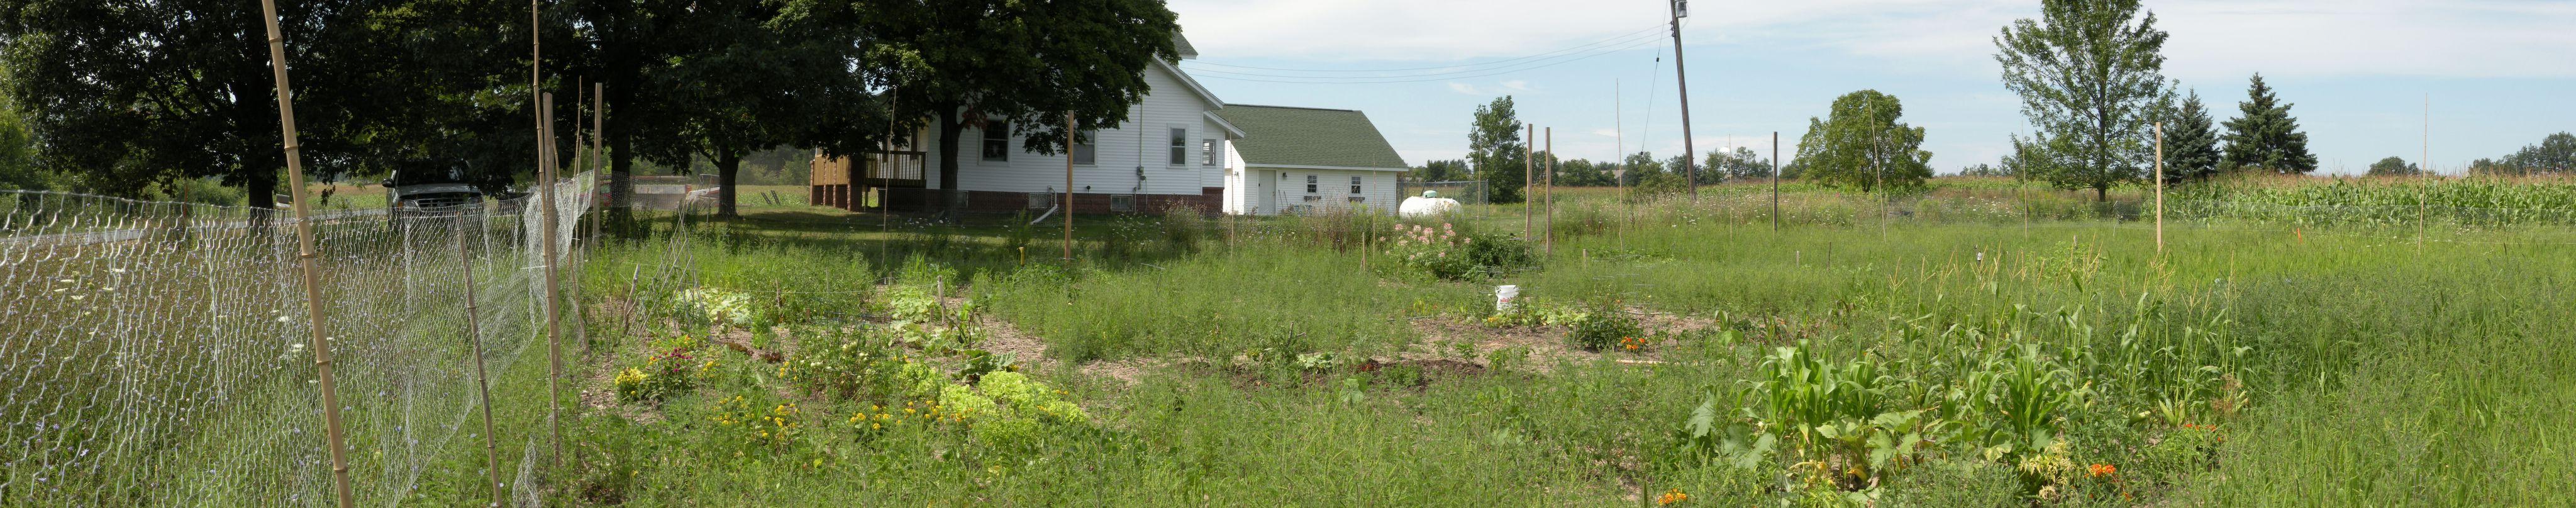 white house in field with wildflowers and a propane tank, large tree on right